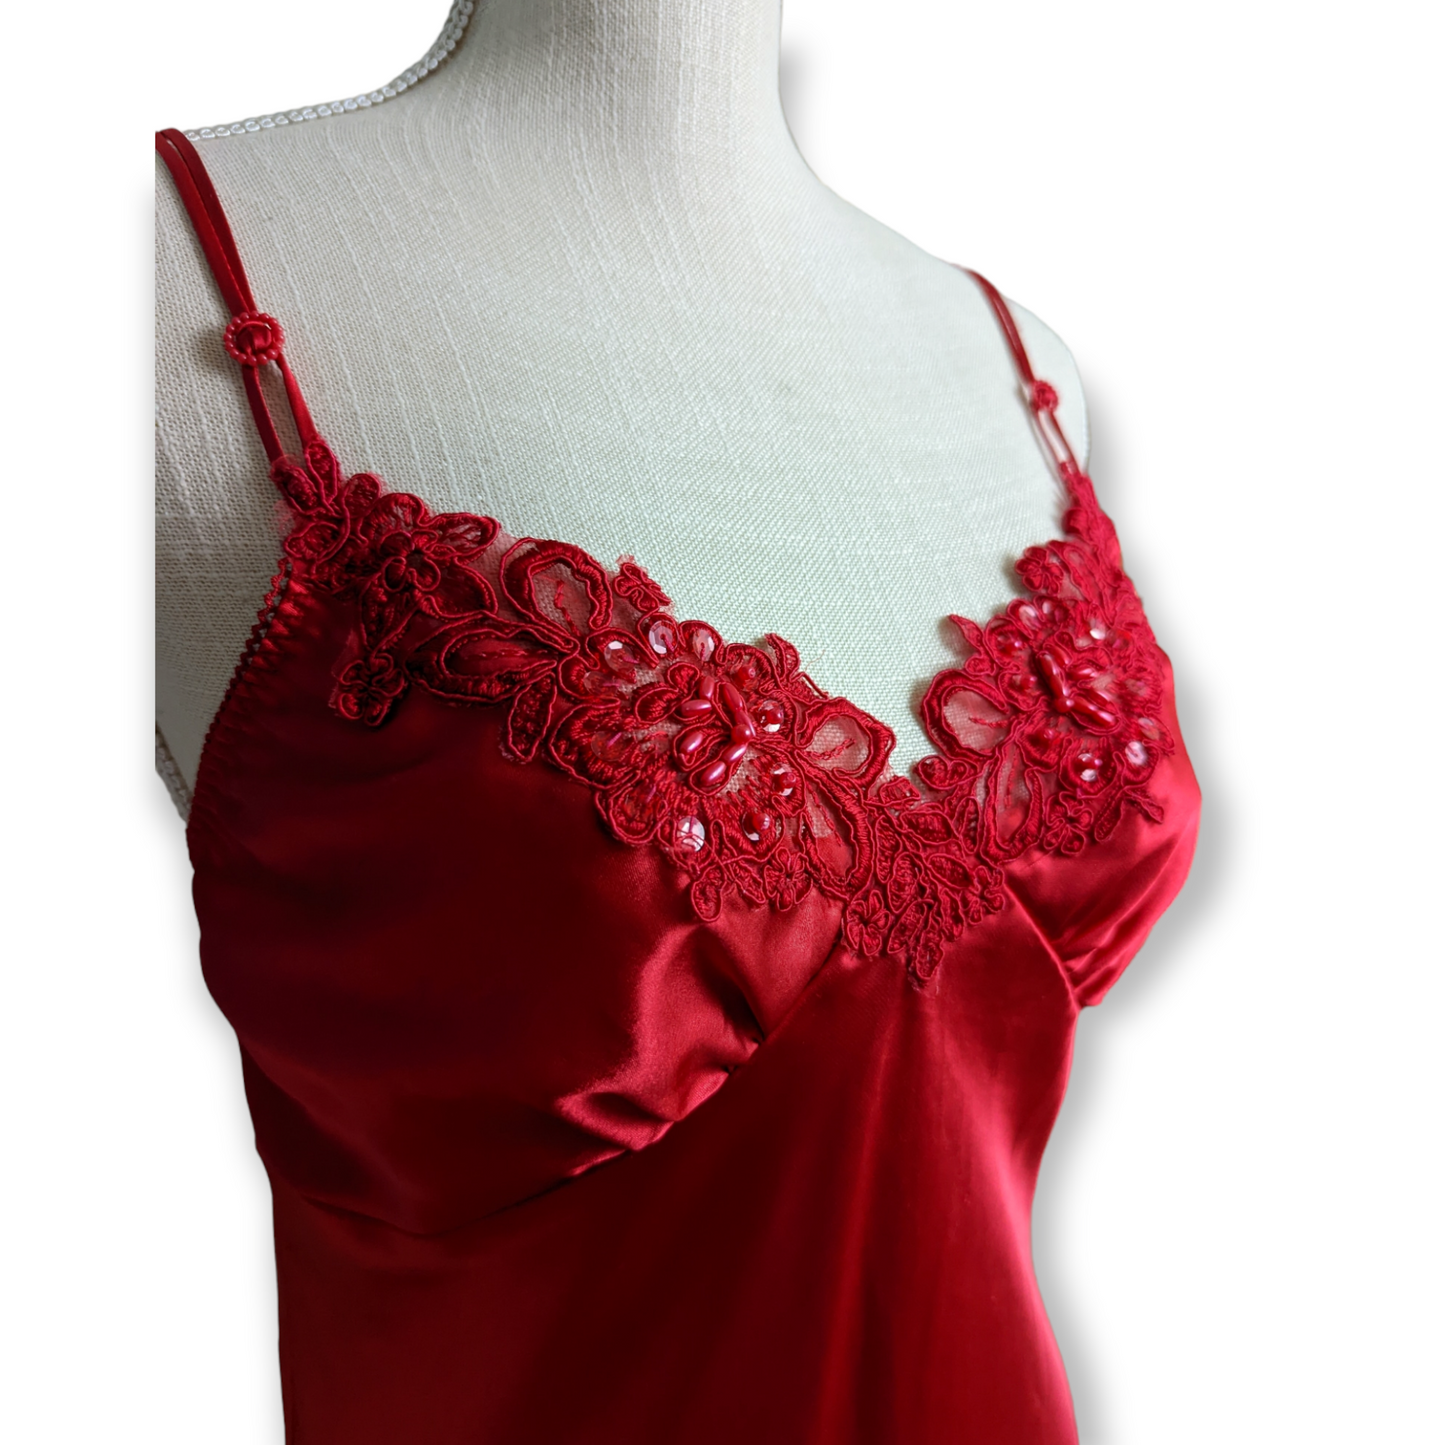 1980s Crimson Red Asymmetrical Satin Slip Nightgown Dress with Hand Beading, Lace and Bows